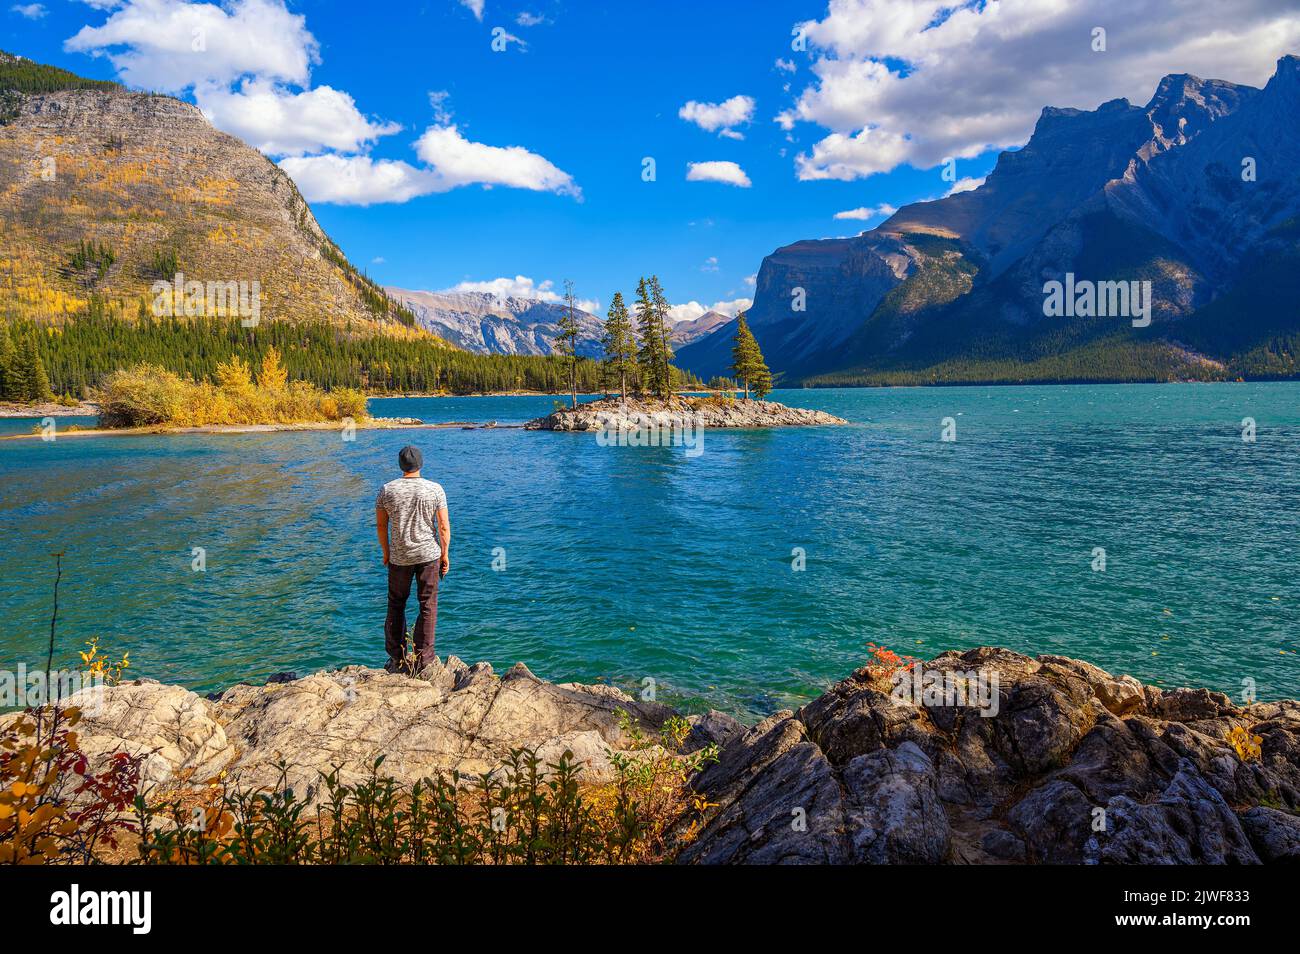 Young hiker standing at Lake Minnewanka in Banff National Park, Canada Stock Photo